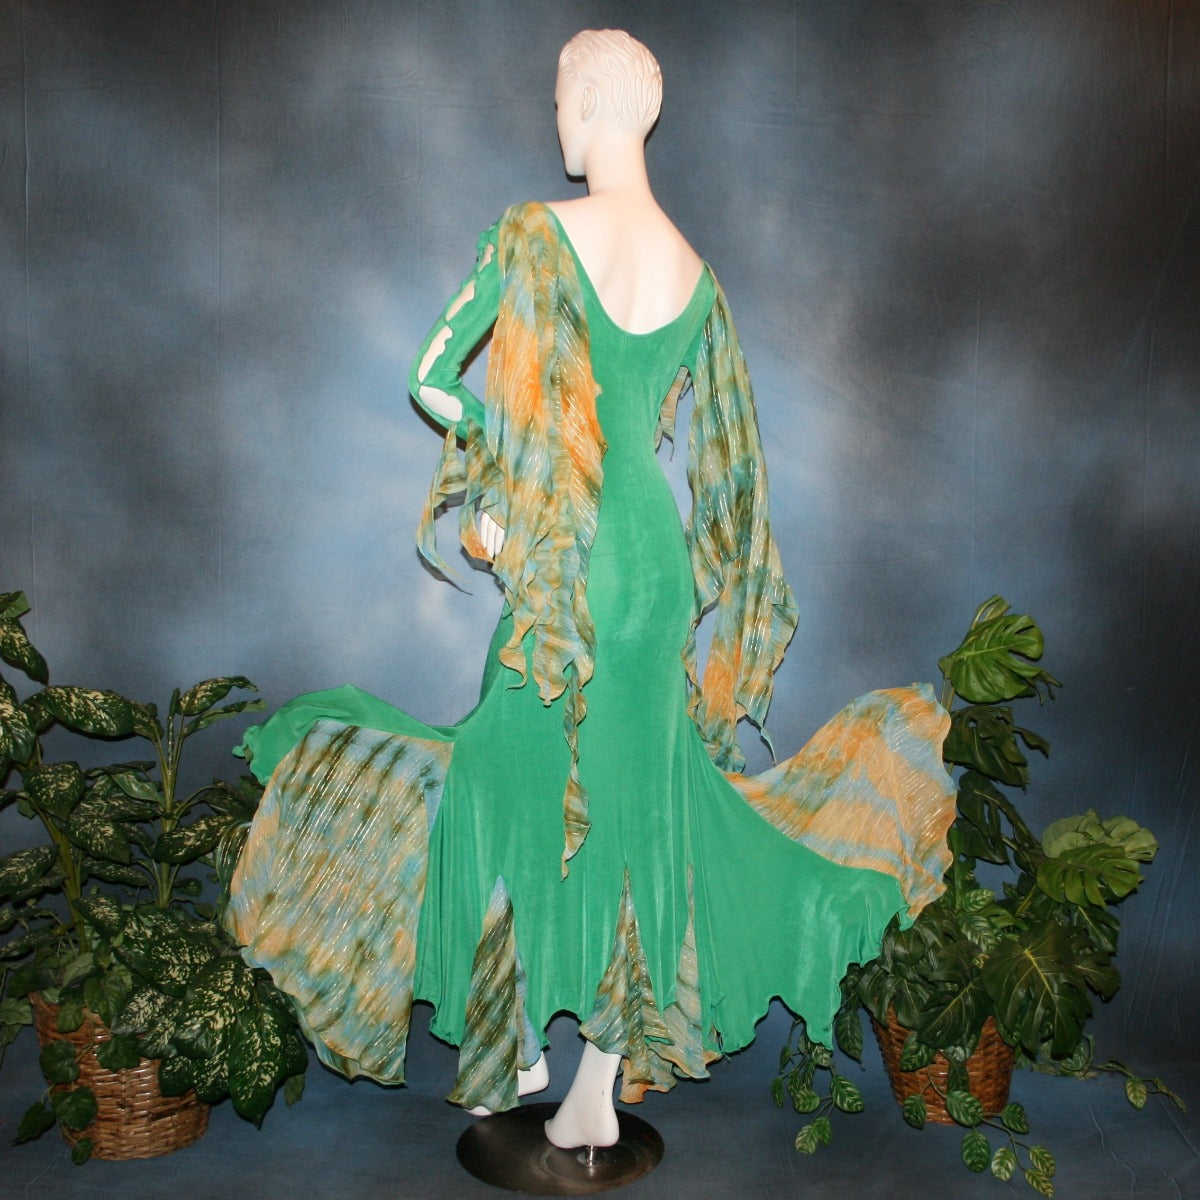 Crystal's Creations back view of Gorgeous green ballroom dress created in luxurious solid slinky fabric with printed chiffon of greens, with gold accents insets. Very full around bottom...can be a beginner ballroom dancer smooth or standard dress.